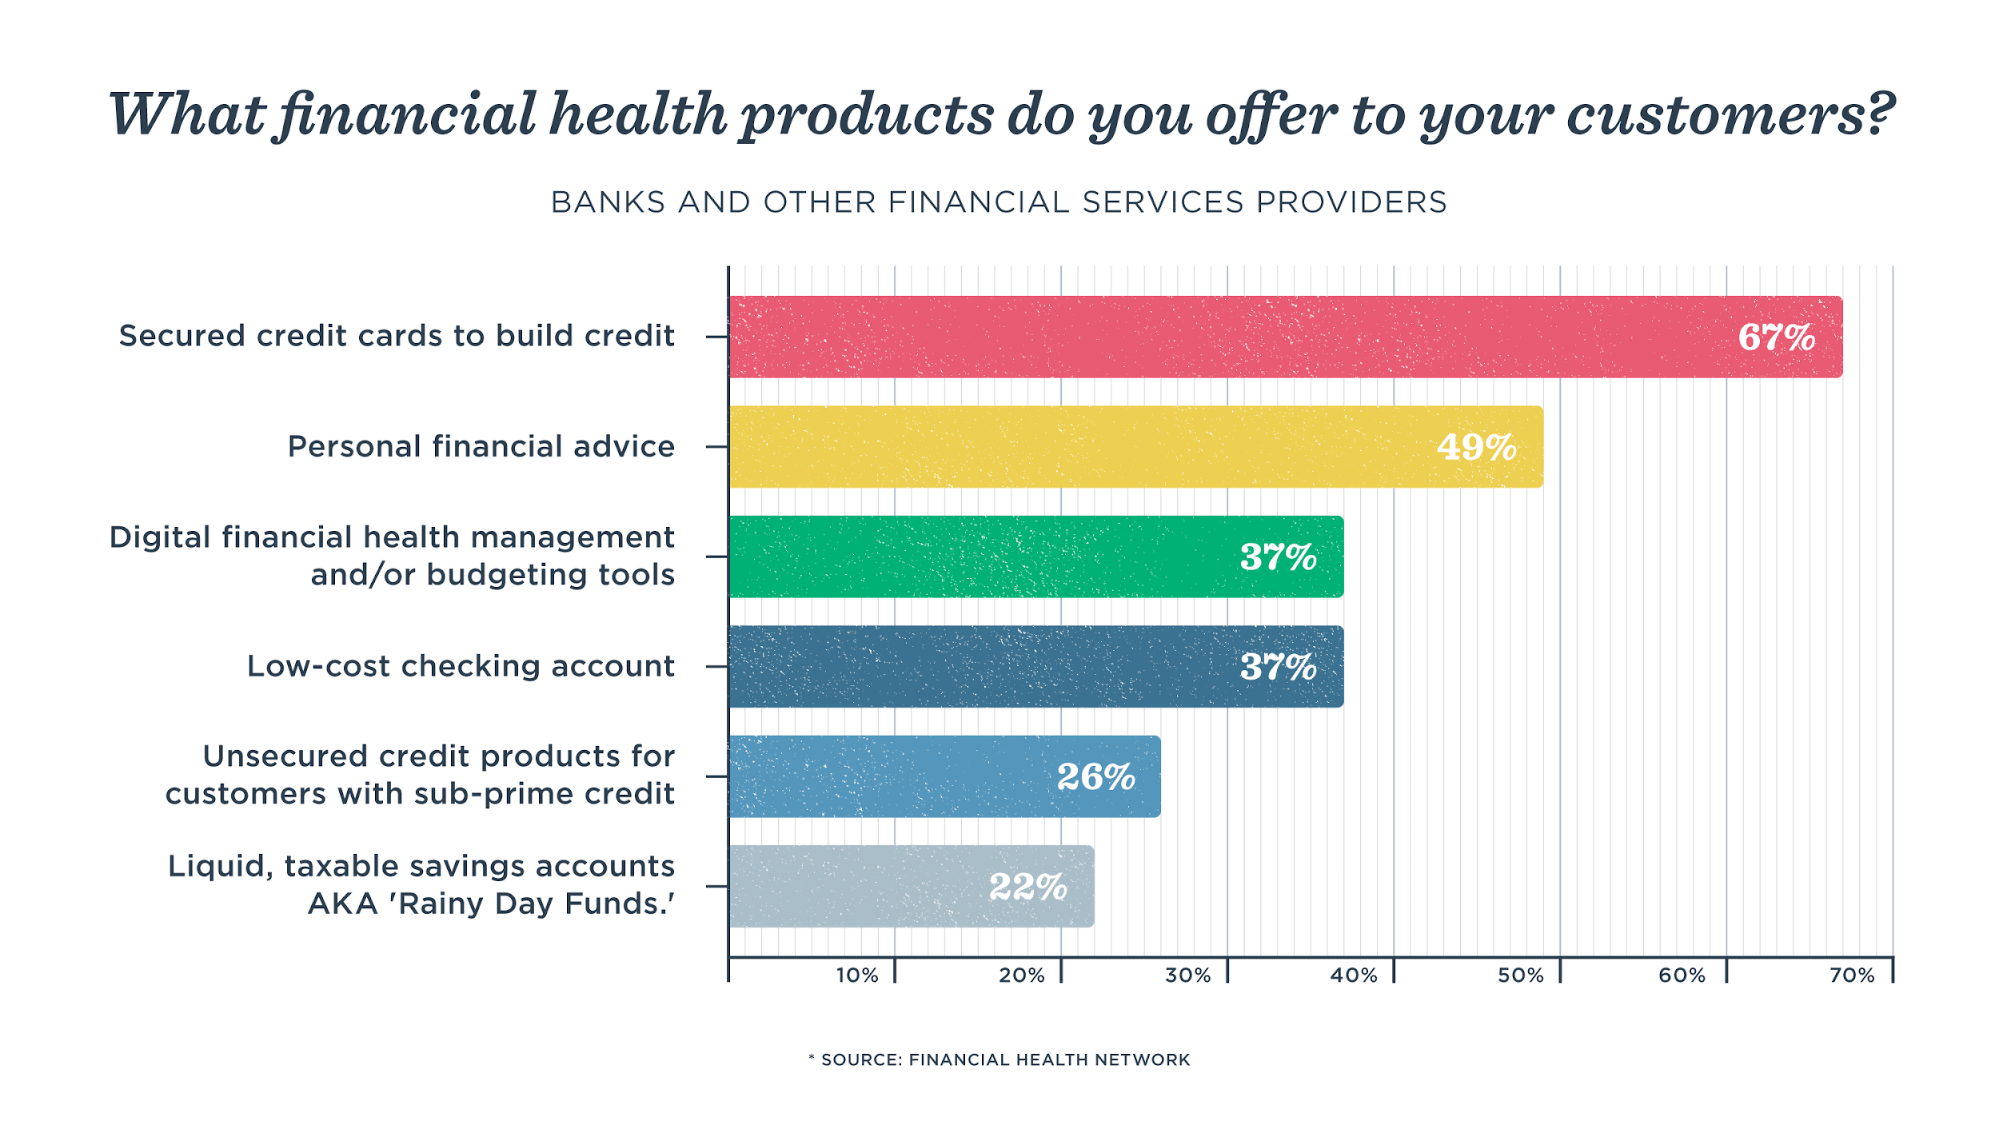 Financially healthy customers are good for business